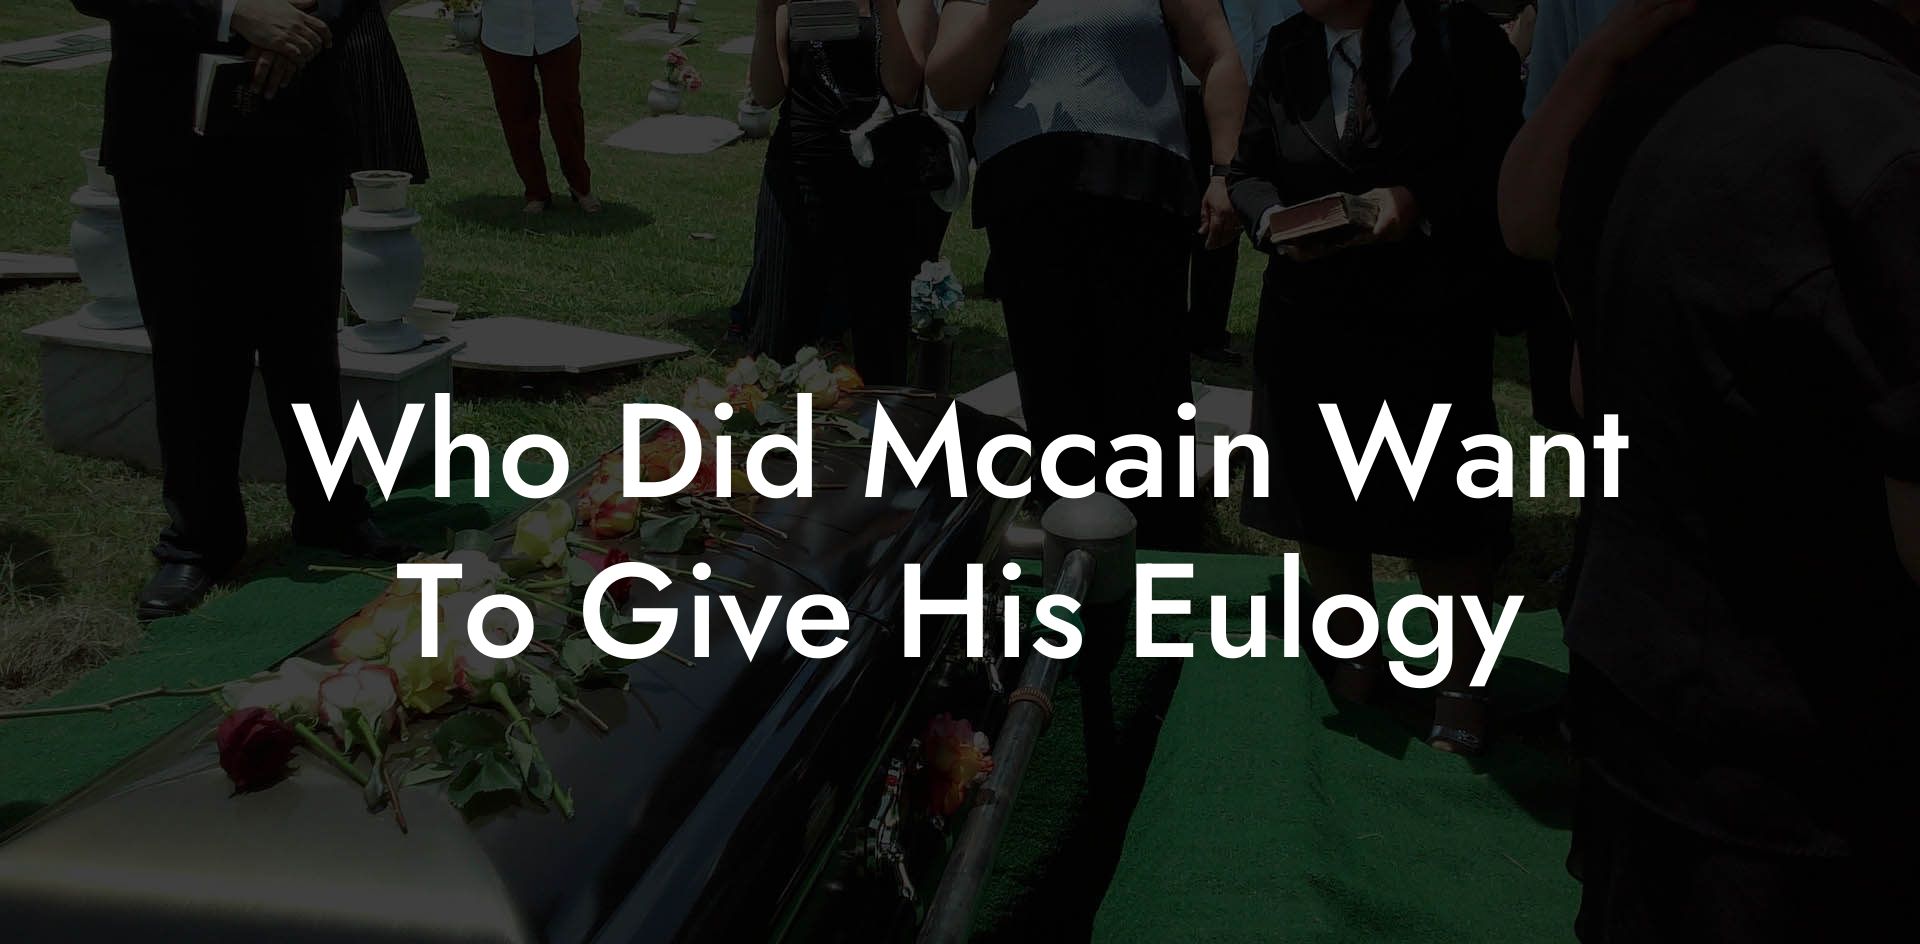 Who Did Mccain Want To Give His Eulogy